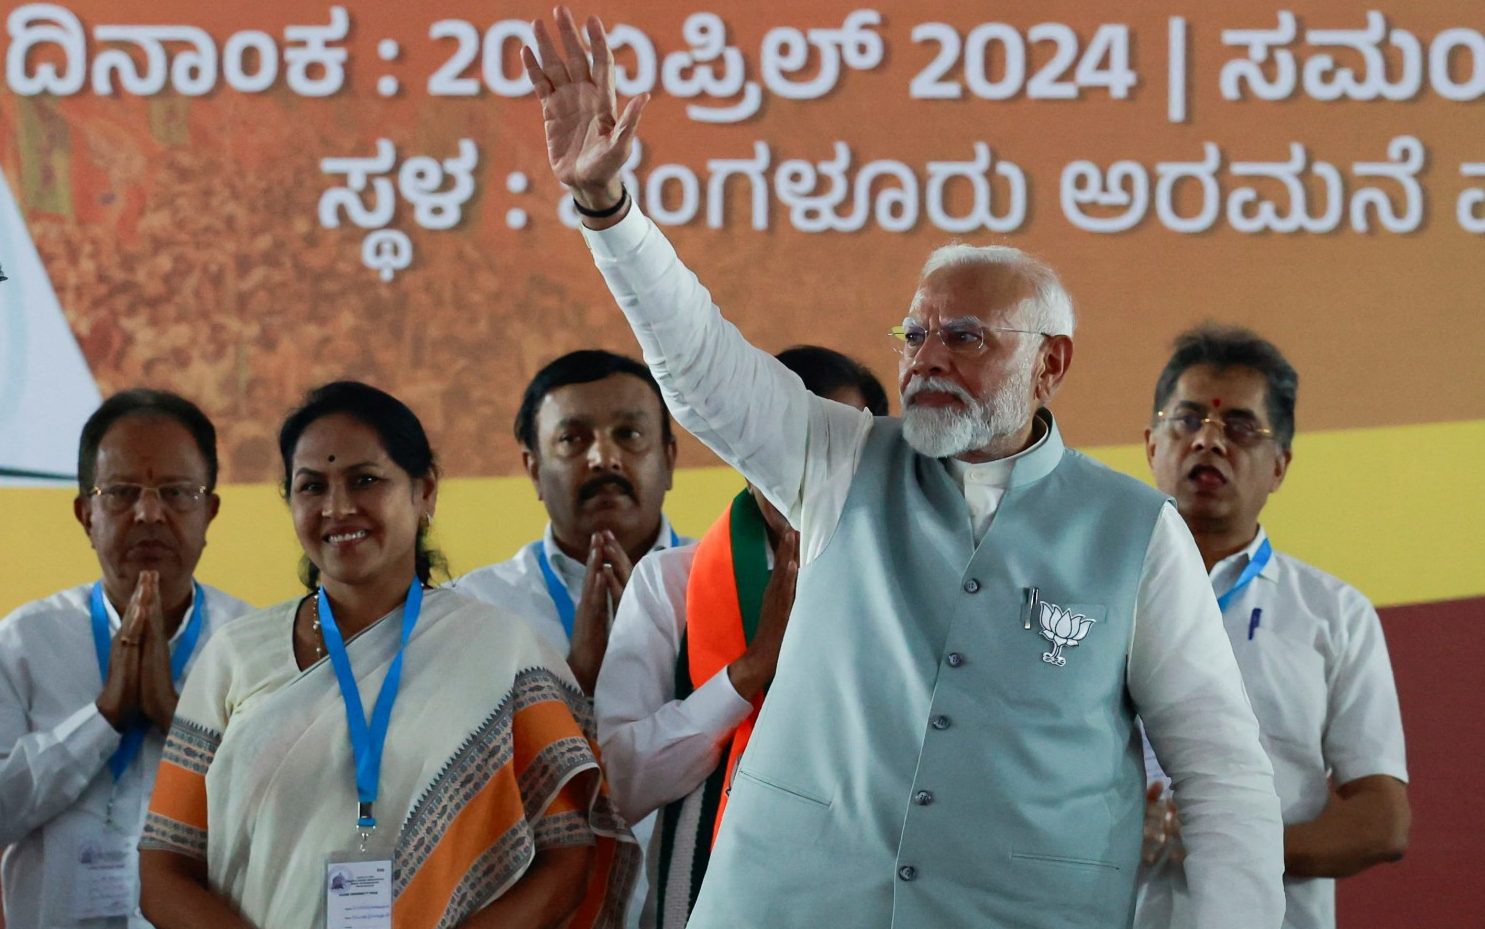 anger as modi rails against muslim ‘infiltrators’ with ‘lots of children’